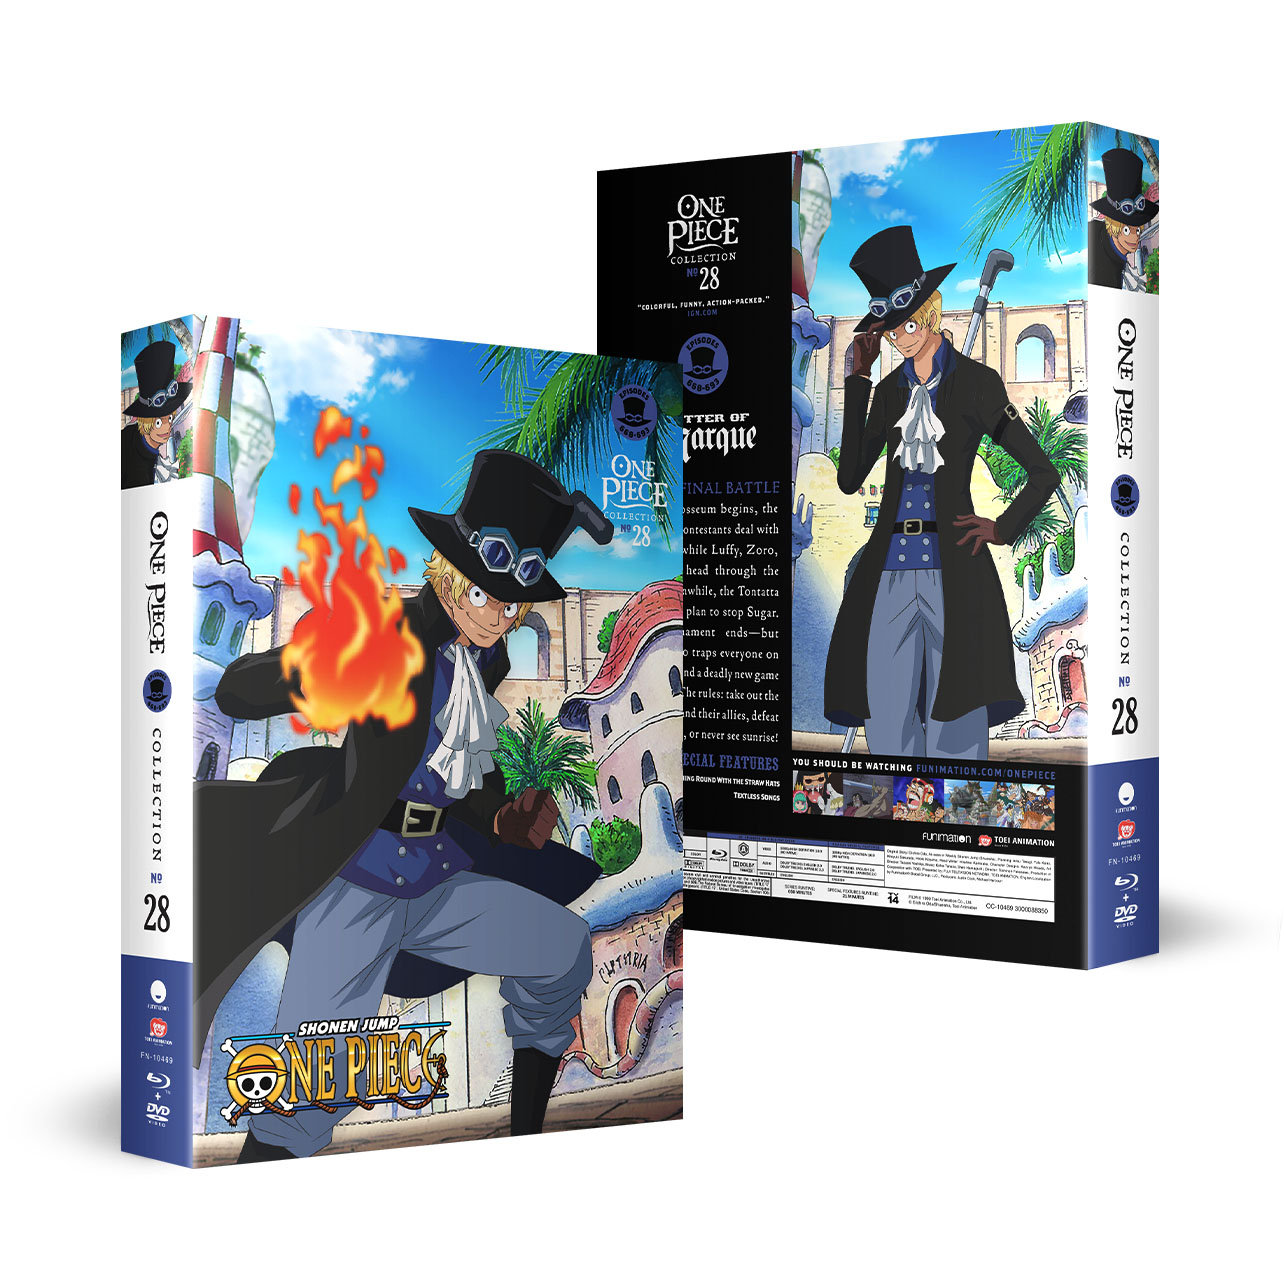 One Piece - Collection 28 - Blu-ray + DVD | Crunchyroll Store